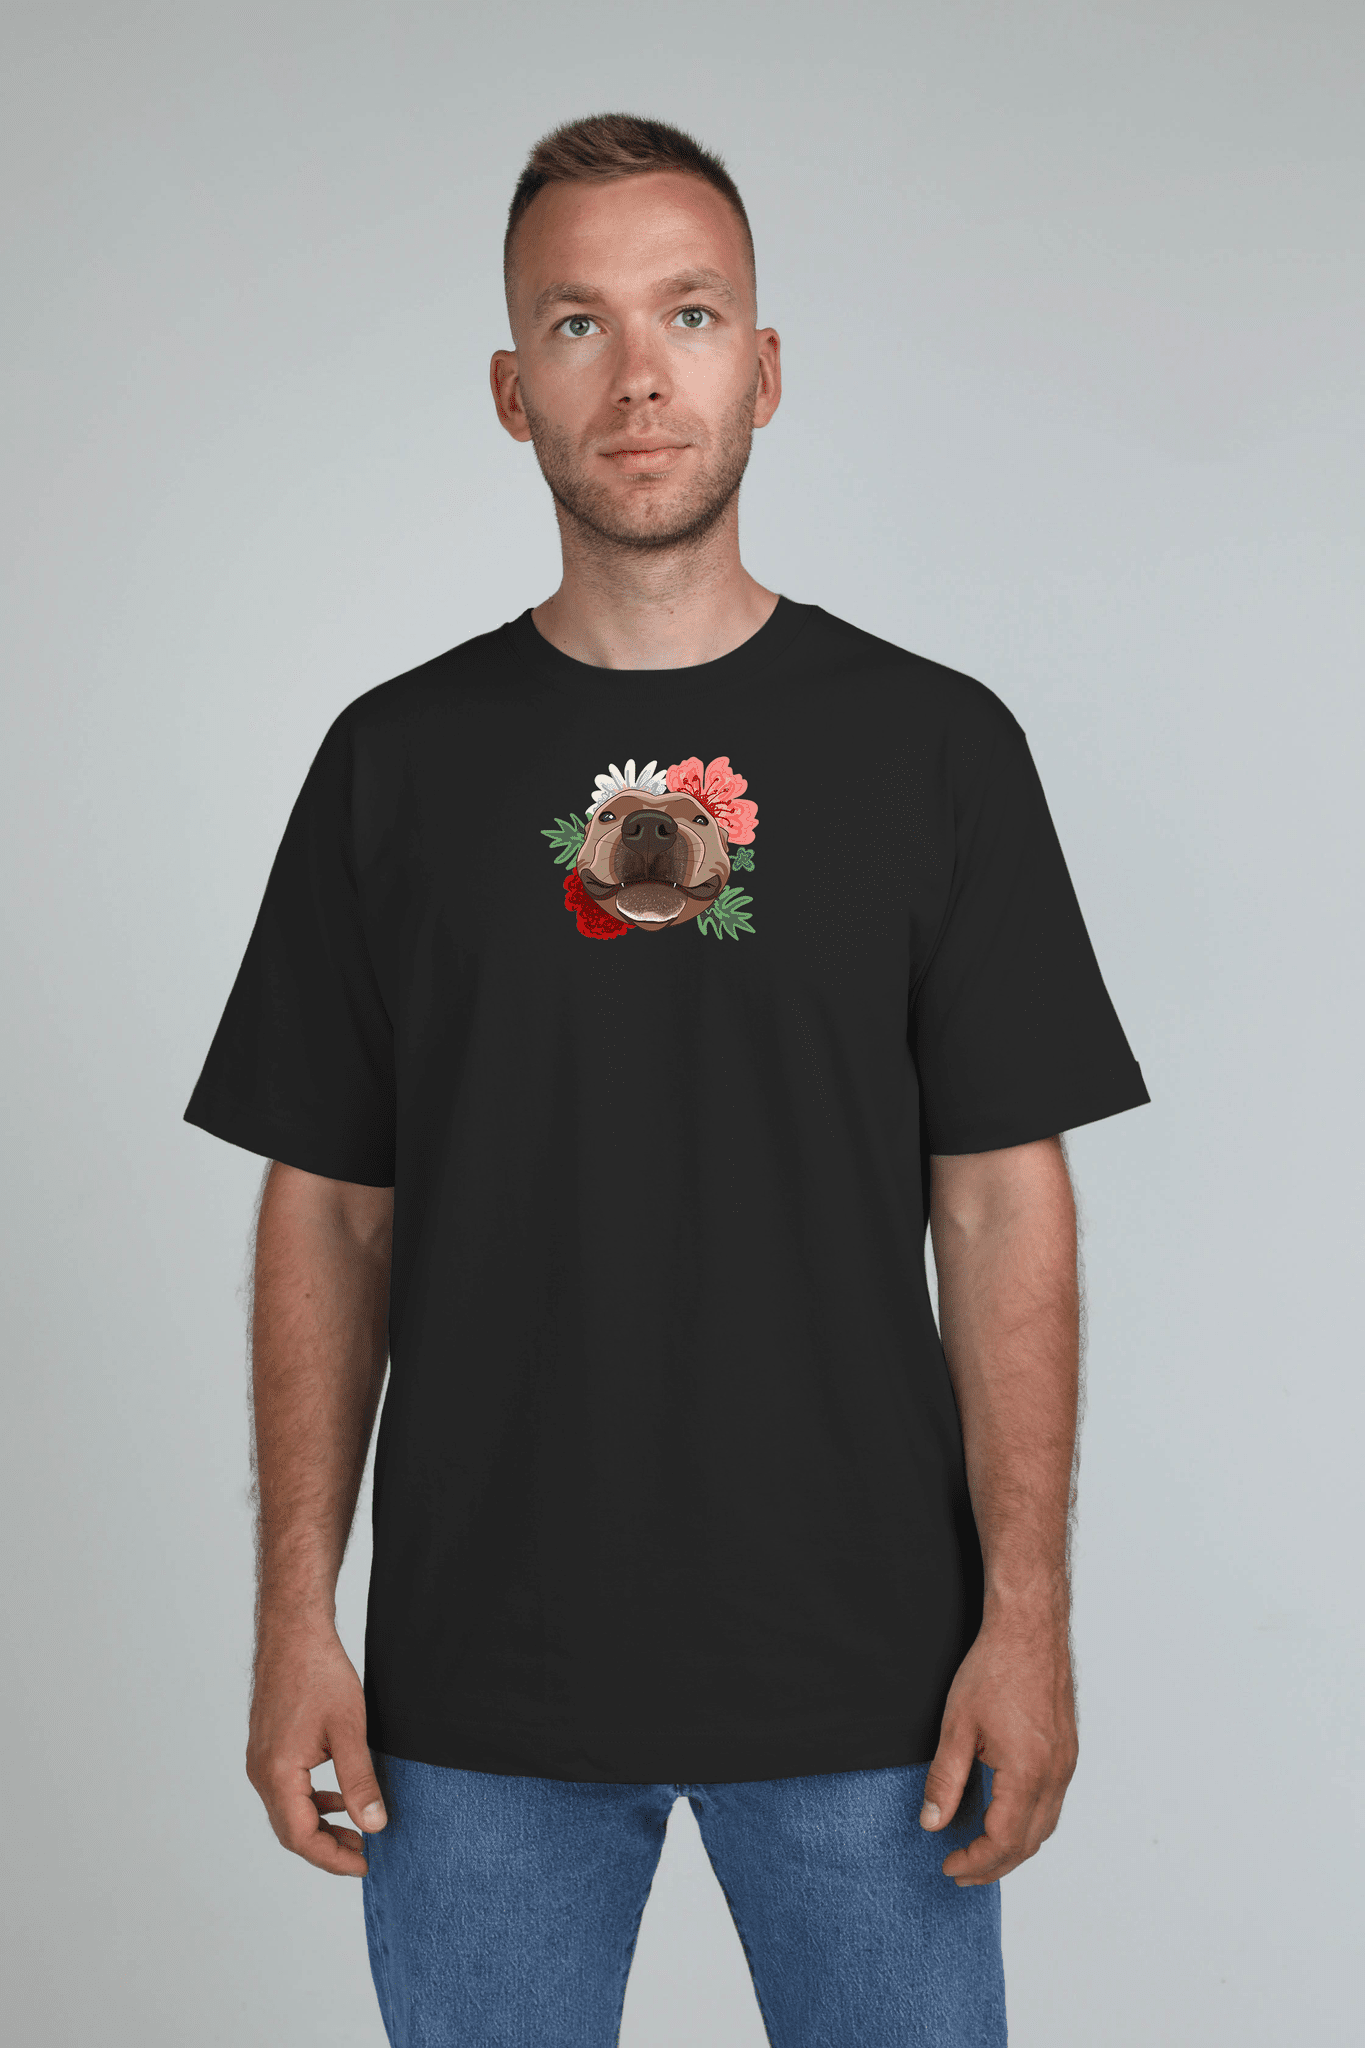 Serious dog with flowers | Heavyweight T-Shirt with dog. Oversized | Unisex by My Wild Other